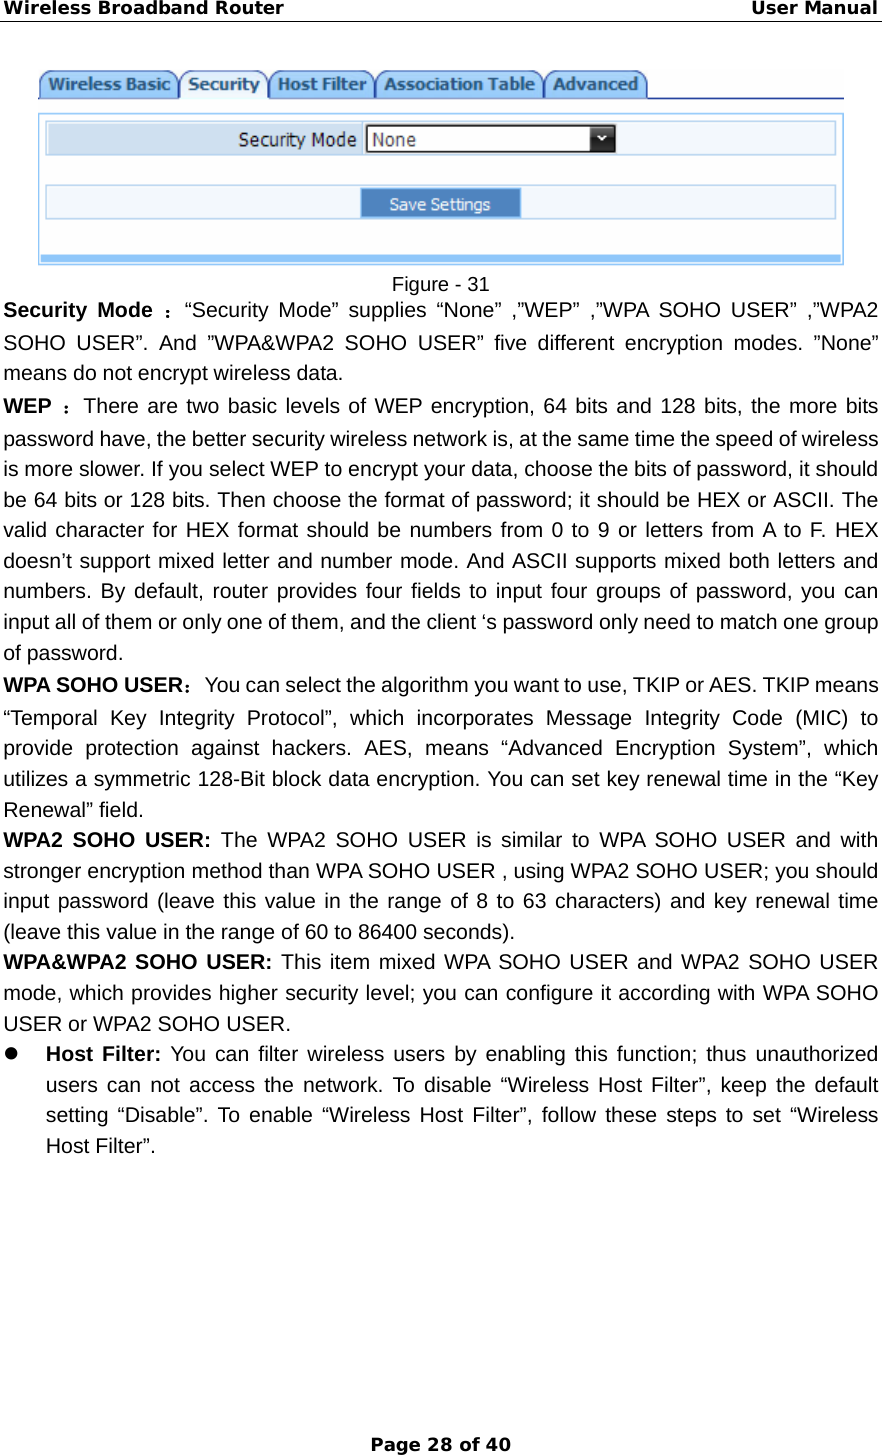 Wireless Broadband Router                                                   User Manual Page 28 of 40  Figure - 31 Security Mode ：“Security Mode” supplies “None” ,”WEP” ,”WPA SOHO USER” ,”WPA2 SOHO USER”. And ”WPA&amp;WPA2 SOHO USER” five different encryption modes. ”None” means do not encrypt wireless data. WEP  ：There are two basic levels of WEP encryption, 64 bits and 128 bits, the more bits password have, the better security wireless network is, at the same time the speed of wireless is more slower. If you select WEP to encrypt your data, choose the bits of password, it should be 64 bits or 128 bits. Then choose the format of password; it should be HEX or ASCII. The valid character for HEX format should be numbers from 0 to 9 or letters from A to F. HEX doesn’t support mixed letter and number mode. And ASCII supports mixed both letters and numbers. By default, router provides four fields to input four groups of password, you can input all of them or only one of them, and the client ‘s password only need to match one group of password.   WPA SOHO USER：You can select the algorithm you want to use, TKIP or AES. TKIP means “Temporal Key Integrity Protocol”, which incorporates Message Integrity Code (MIC) to provide protection against hackers. AES, means “Advanced Encryption System”, which utilizes a symmetric 128-Bit block data encryption. You can set key renewal time in the “Key Renewal” field.   WPA2 SOHO USER: The WPA2 SOHO USER is similar to WPA SOHO USER and with stronger encryption method than WPA SOHO USER , using WPA2 SOHO USER; you should input password (leave this value in the range of 8 to 63 characters) and key renewal time (leave this value in the range of 60 to 86400 seconds). WPA&amp;WPA2 SOHO USER: This item mixed WPA SOHO USER and WPA2 SOHO USER mode, which provides higher security level; you can configure it according with WPA SOHO USER or WPA2 SOHO USER. z Host Filter: You can filter wireless users by enabling this function; thus unauthorized users can not access the network. To disable “Wireless Host Filter”, keep the default setting “Disable”. To enable “Wireless Host Filter”, follow these steps to set “Wireless Host Filter”. 